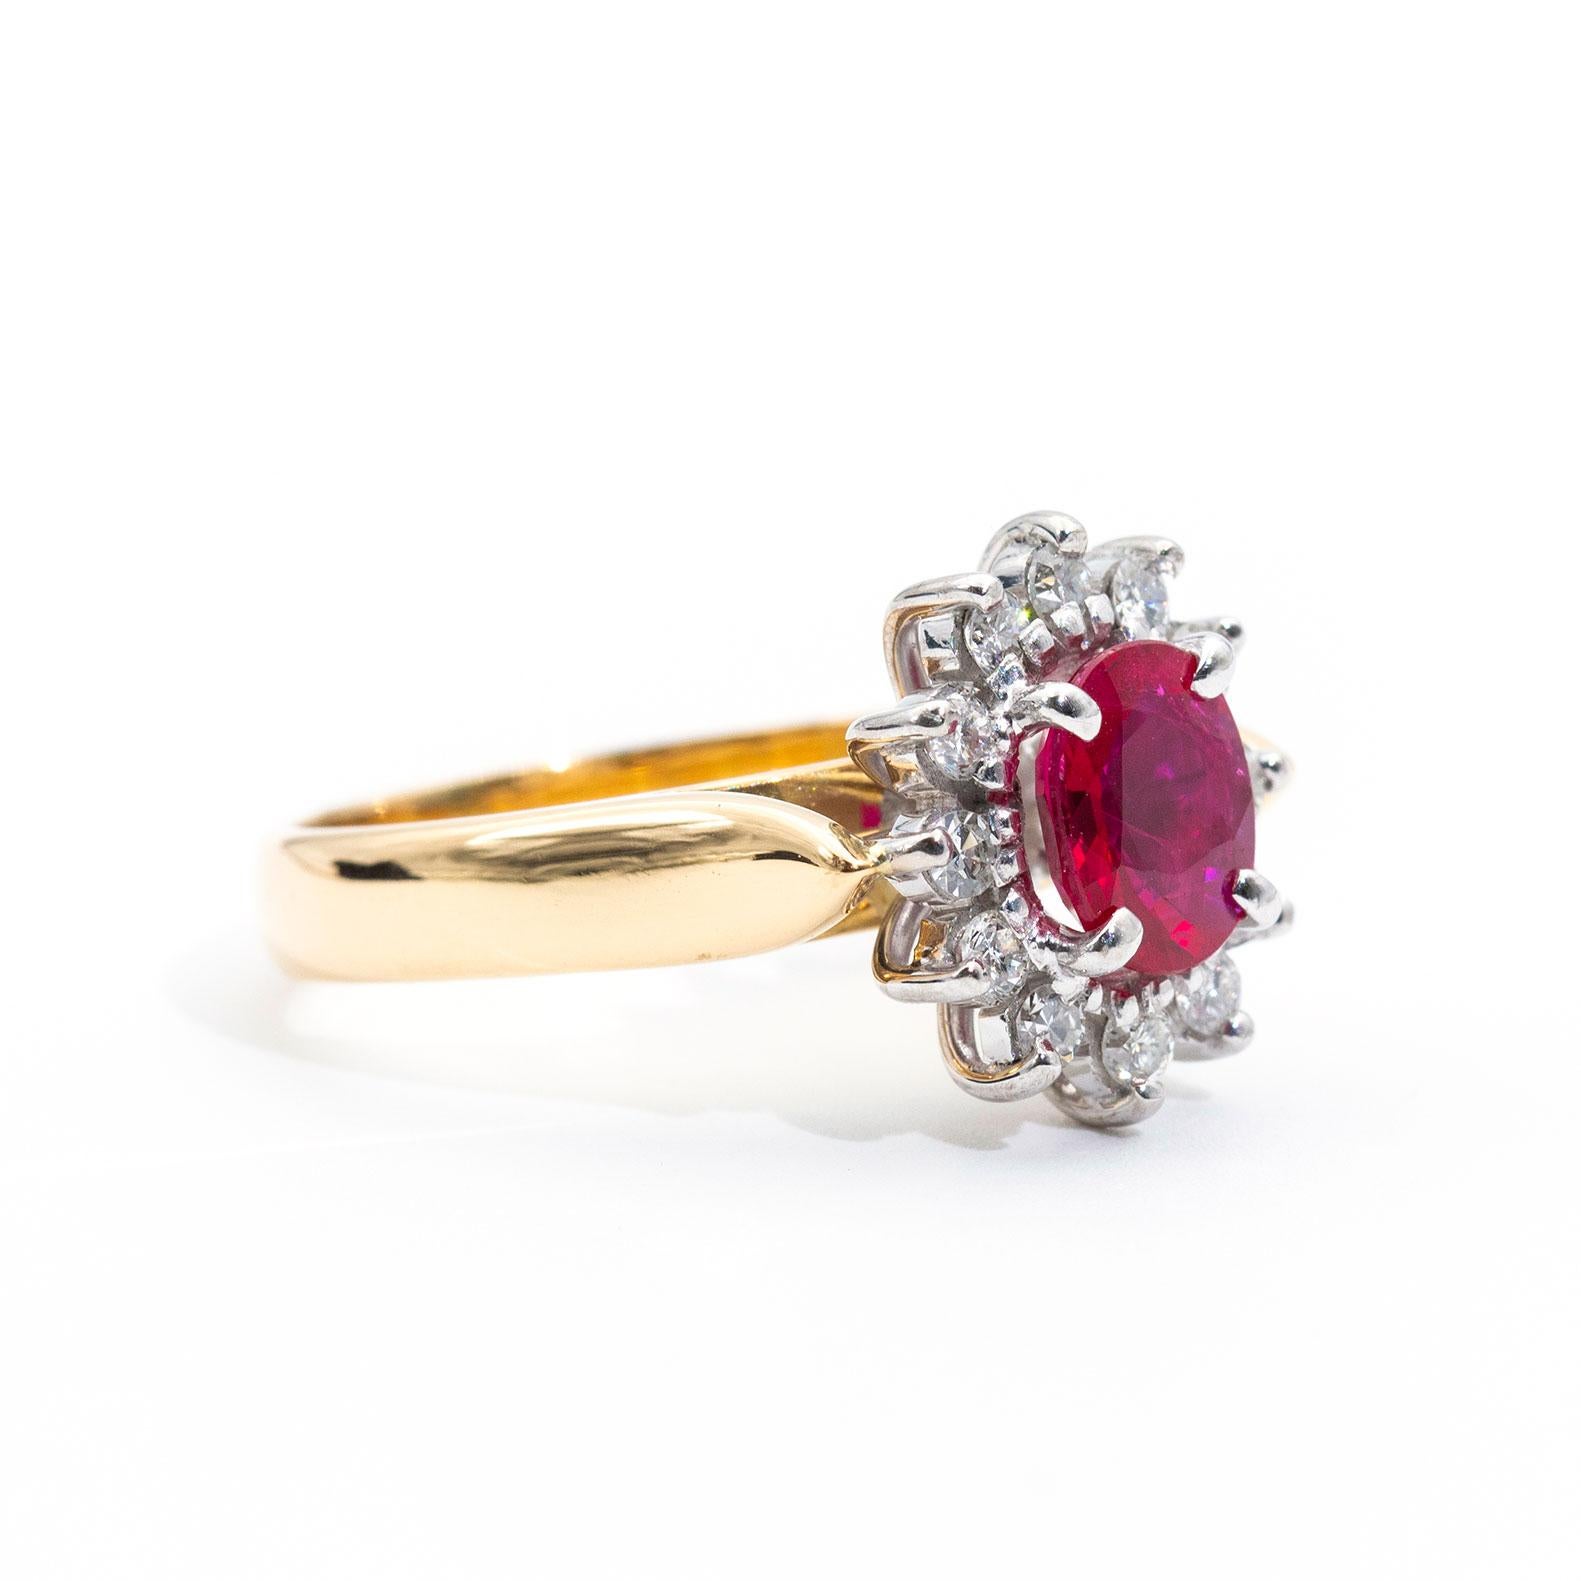 The gorgeous handmade vintage ring is forged in 18 carat yellow and white gold and features a captivating bright red 1.14 carat natural ruby and is surrounded by a charming border of round brilliant cut diamonds. We called this stunning piece The